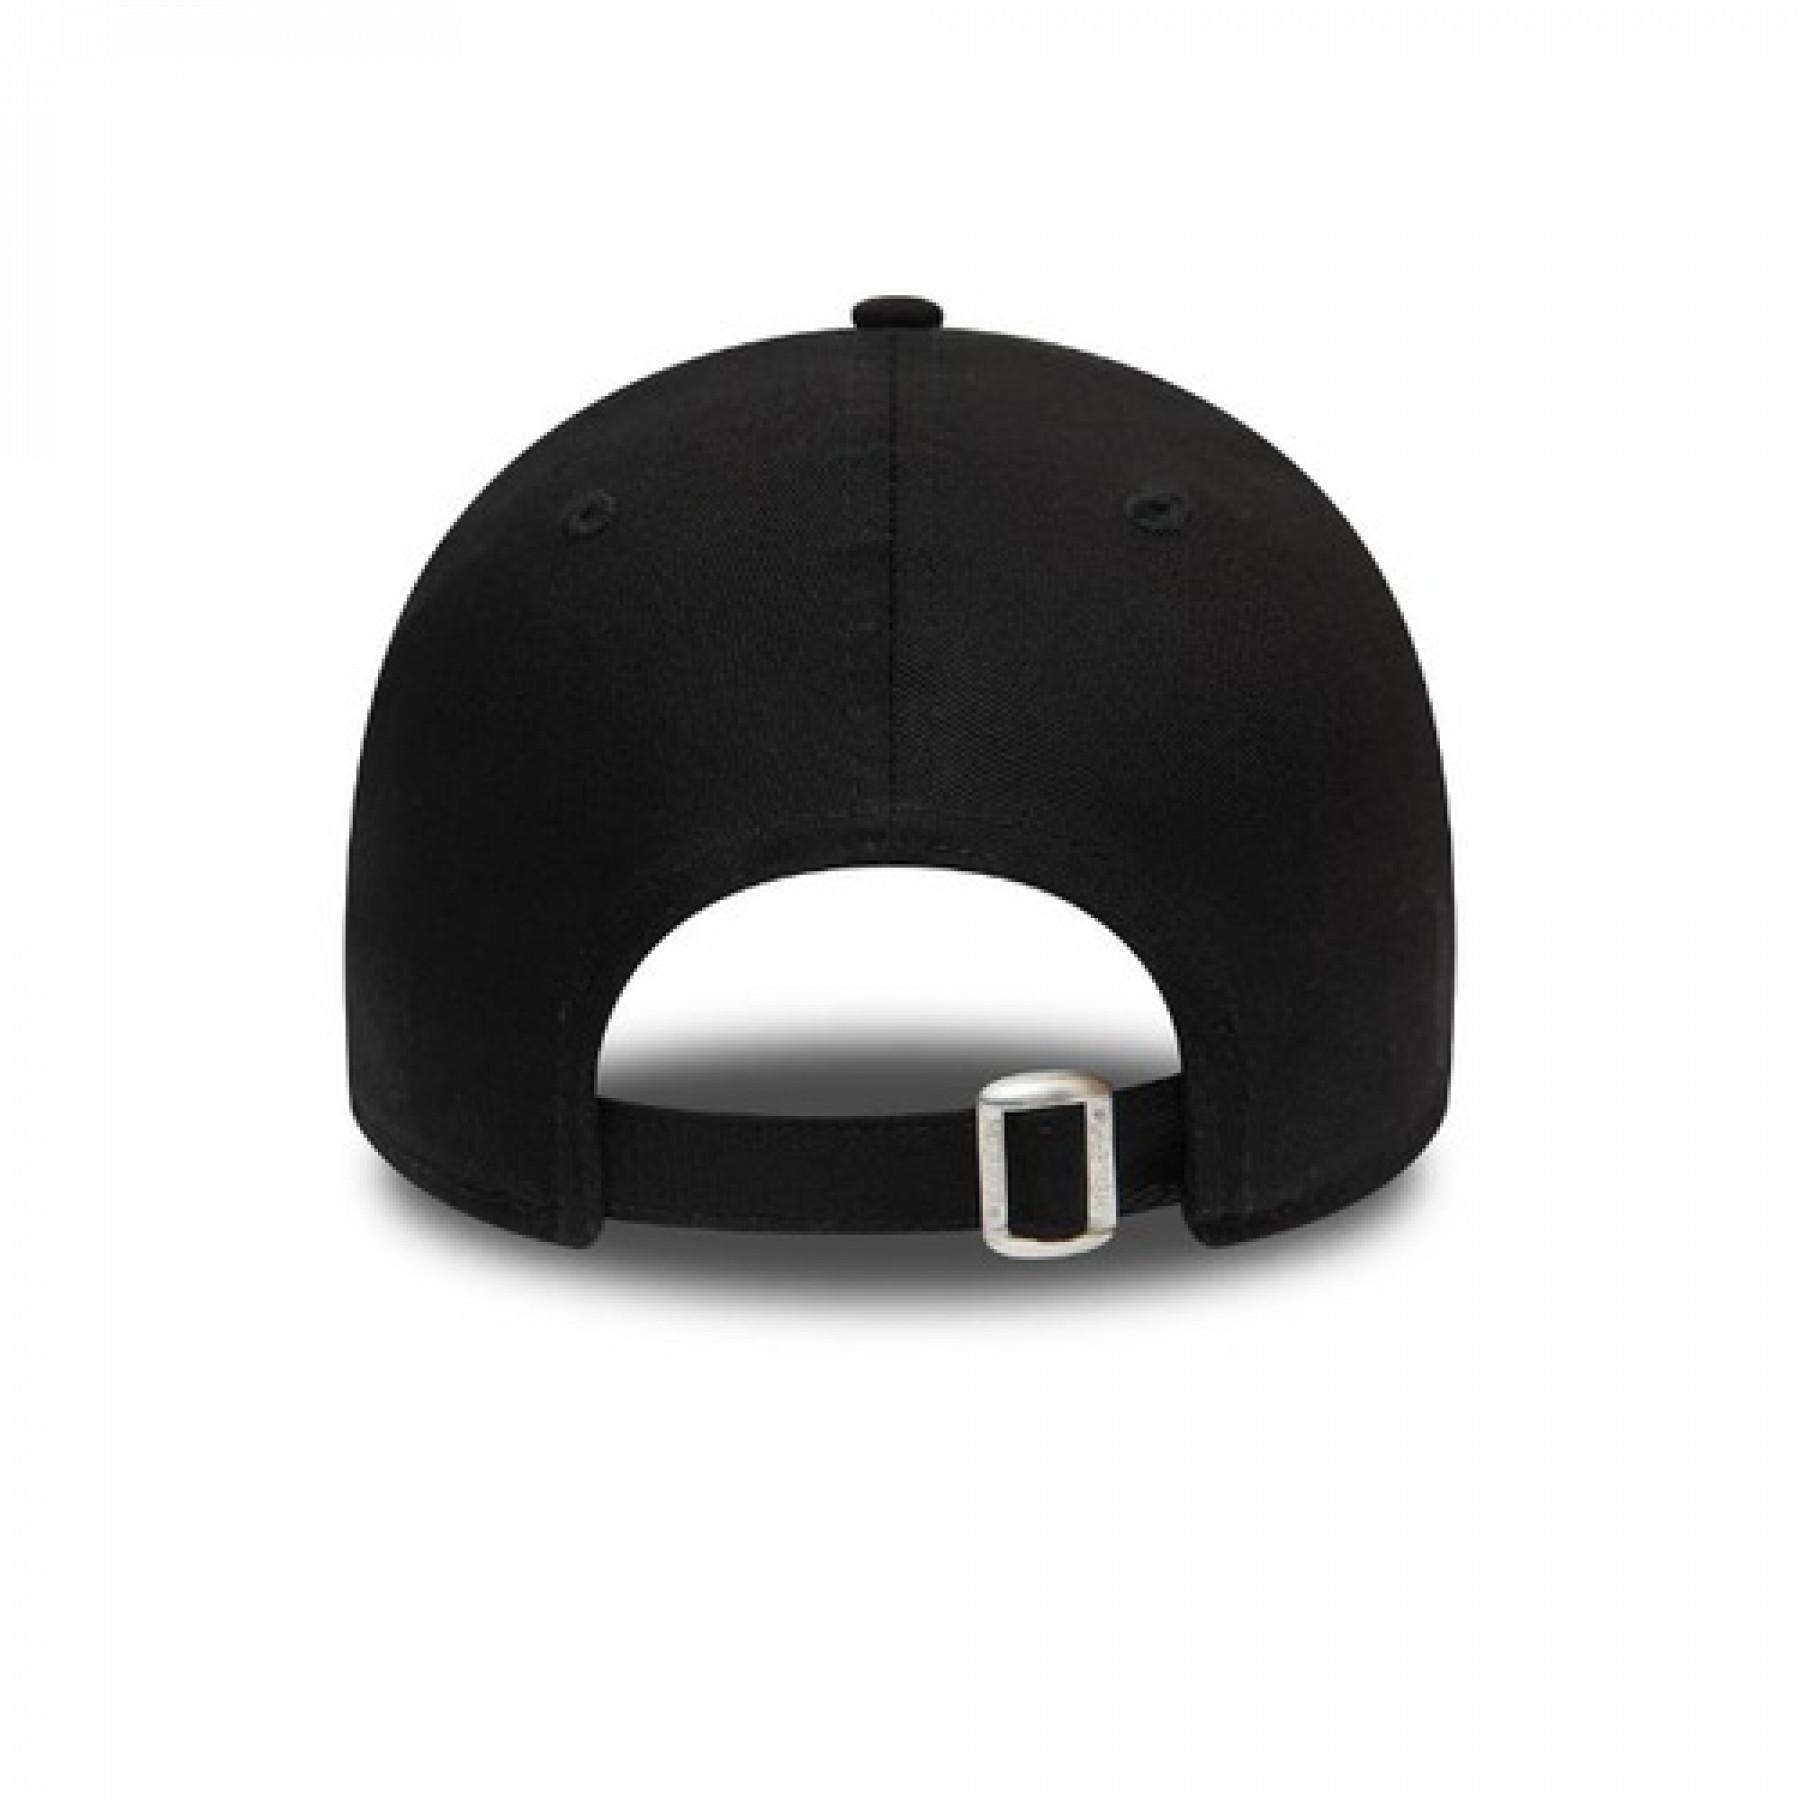 Casquette New Era  Colour 9forty New York Yankees